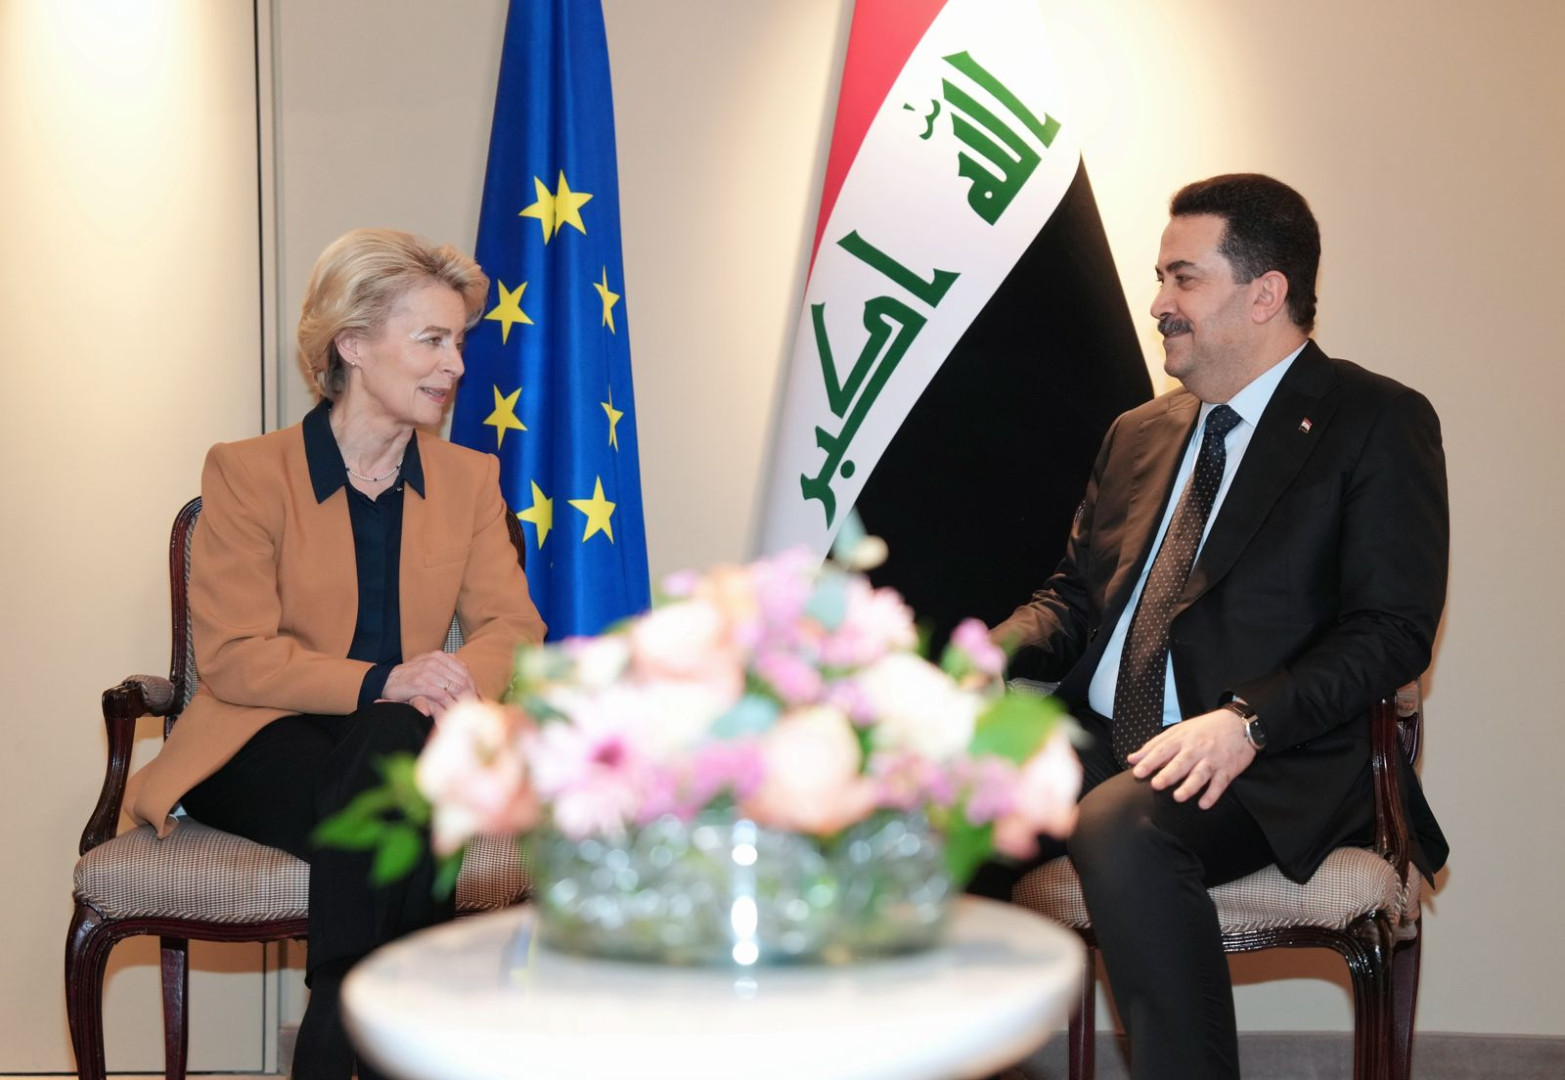 Iraq asks EU for assistance in recovering stolen assets, combating corruption